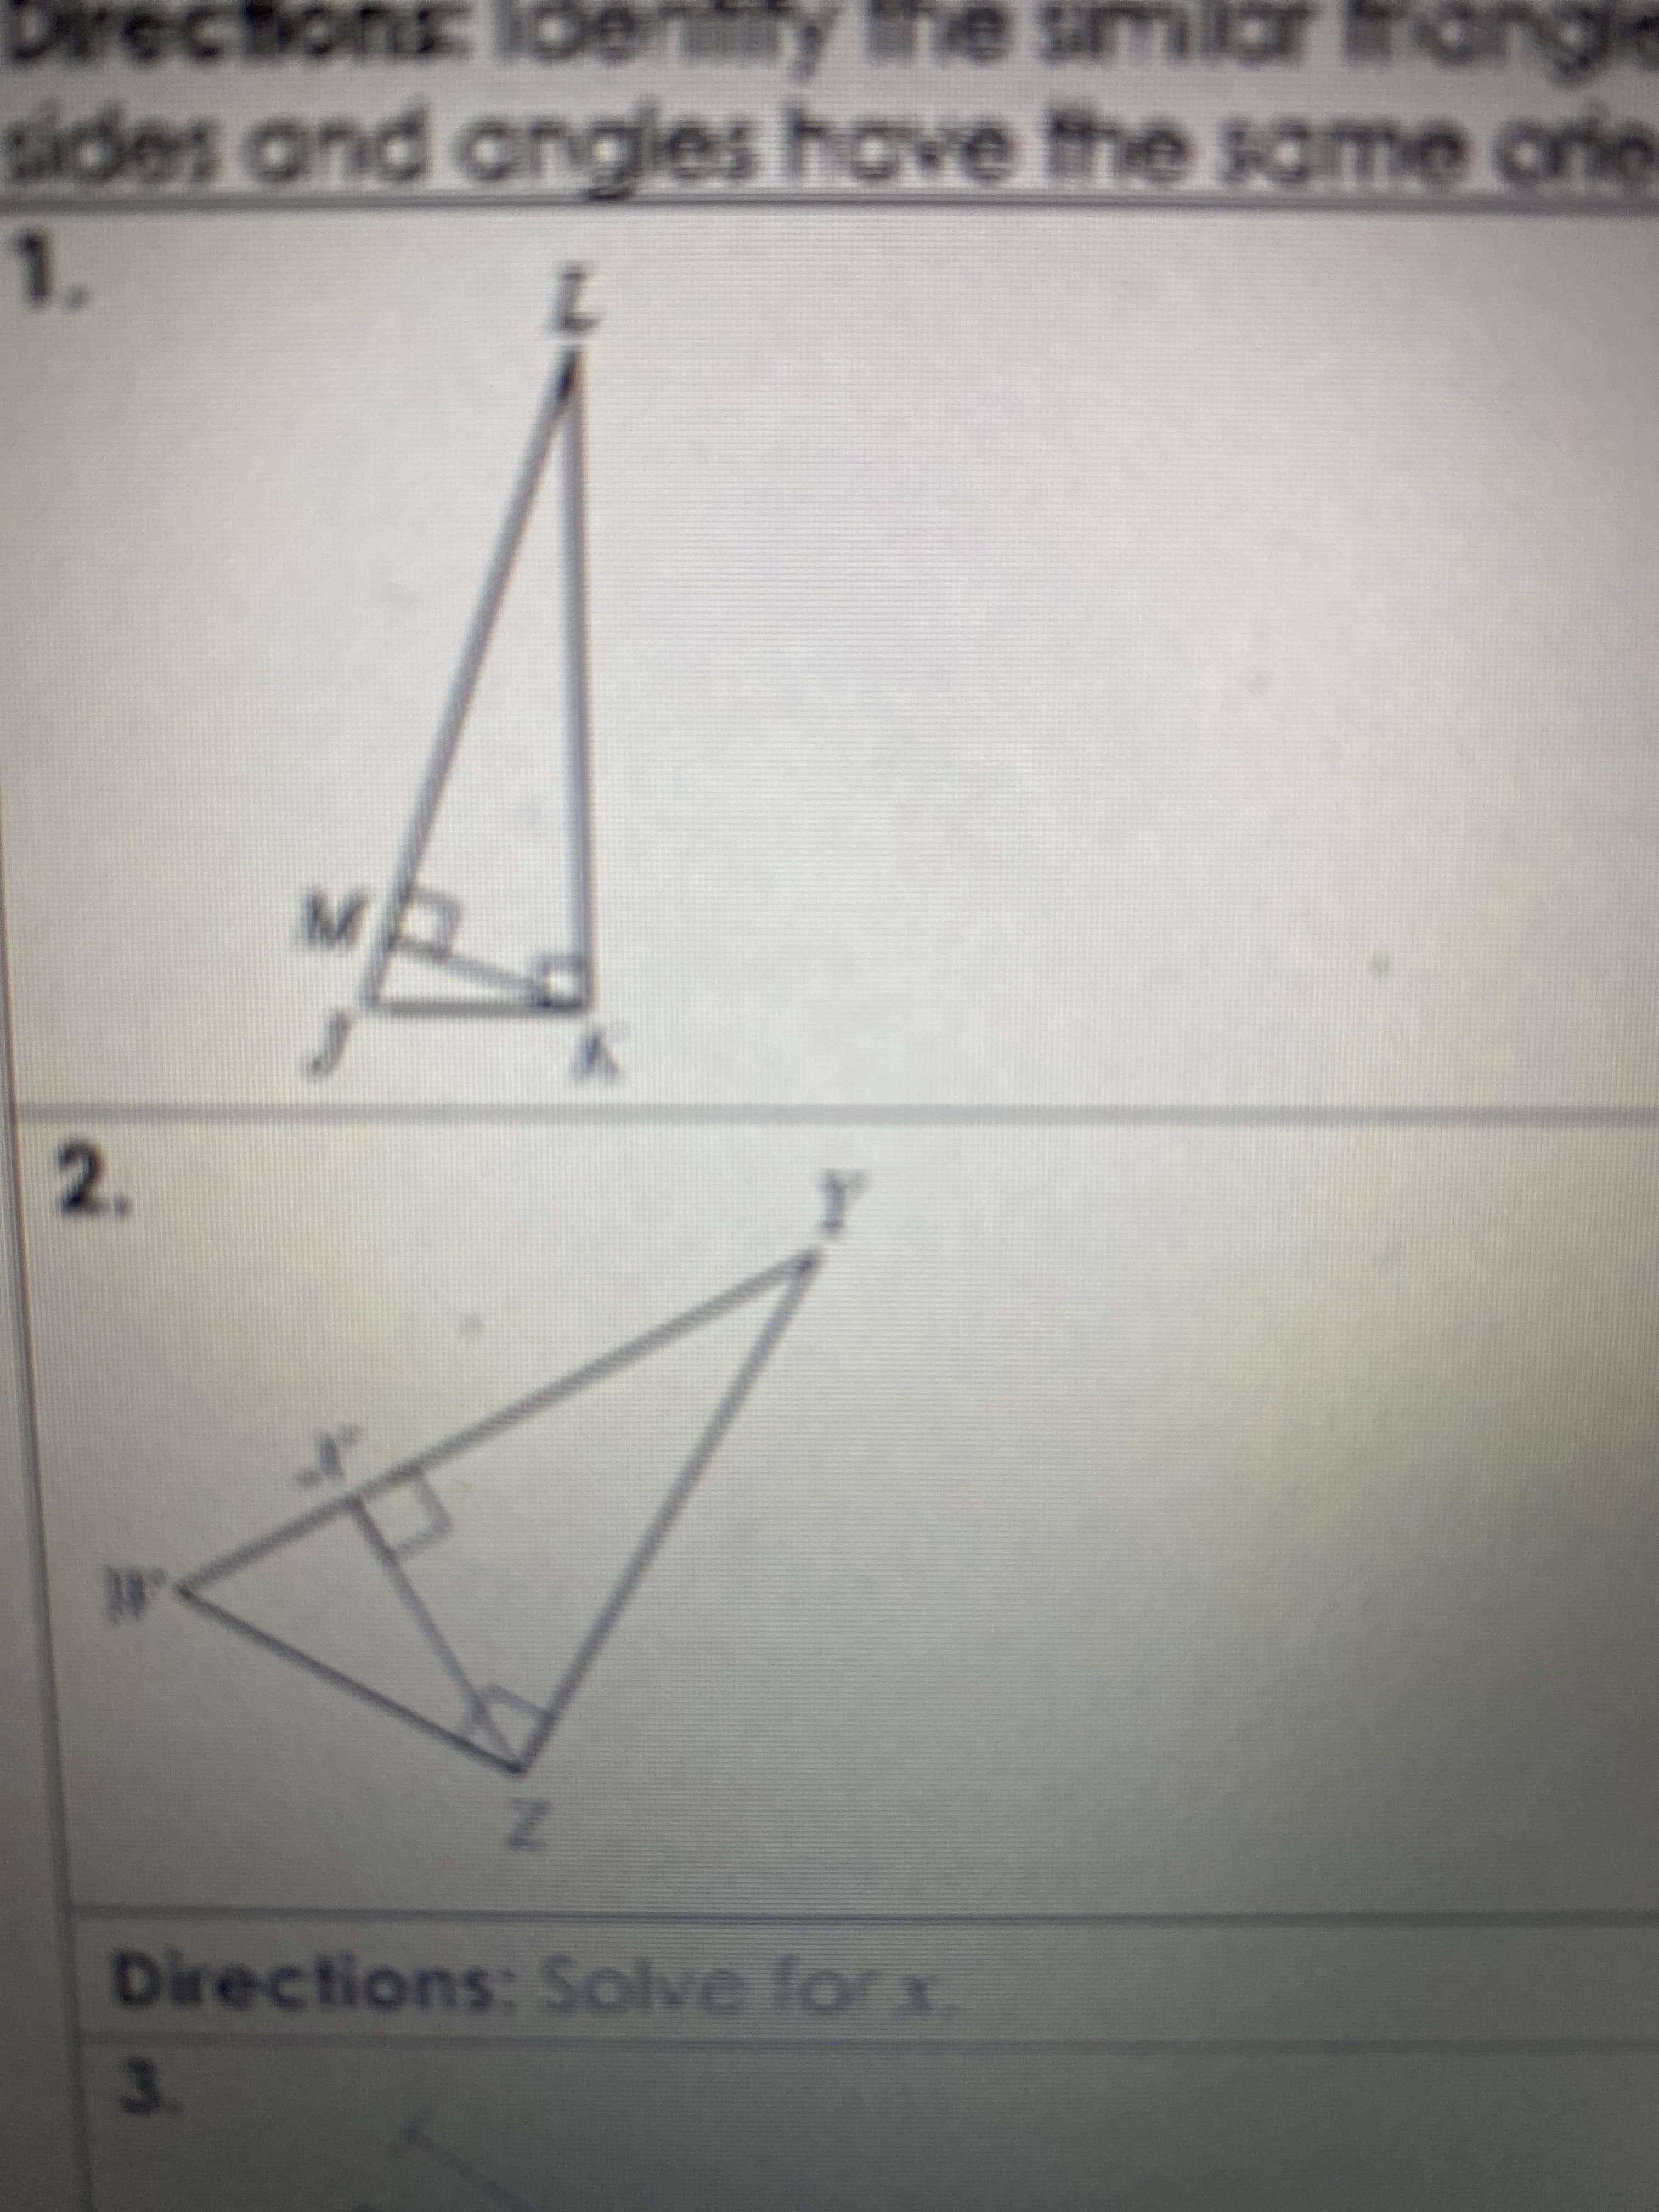 ### Directions: Identify the similar triangles in each case. Recall that similar triangles have the same shape, meaning corresponding sides and angles have the same properties.

#### Problem 1
Consider the triangle \(LZM\) and \(LJK\). In the diagram, two right triangles are shown:

- Triangle \( LZK \) has a right angle at \( M \).
- Triangle \( JMK \) has a right angle at \( K \).

**Diagram Explanation:**

In the diagram, we have two overlapping triangles sharing the same height from point \( L \) to point \( K \). The point \( M \) forms a right angle with both points \( J \) and \( K \).

**Question:** Identify the pairs of similar triangles in the image above.

#### Problem 2
Consider the triangle \(XY\) and the triangle \(XZ\). Both triangles share the same base \(X\), but form different angles:

- Triangle \( XYZ \) has a right angle.
- Smaller triangle inside the larger triangle also has a right angle at point \(X\) and is marked.

**Diagram Explanation:**

In the diagram, two right triangles are shown, one overlapping the other:

- One is the larger triangle \( XYZ \).
- The other is a smaller, internal triangle sharing the same perpendicular height from \(Y\) to \( Y\).

**Question:** Identify the pairs of similar triangles in the image above.

### Directions: Solve for \( x \).

#### Problem 3
A set of similar triangles is given, with various sides marked as \(x\), representing scales and dimensions to be calculated based on given similar properties. (Note: The details of Problem 3 are not visible in the provided image)